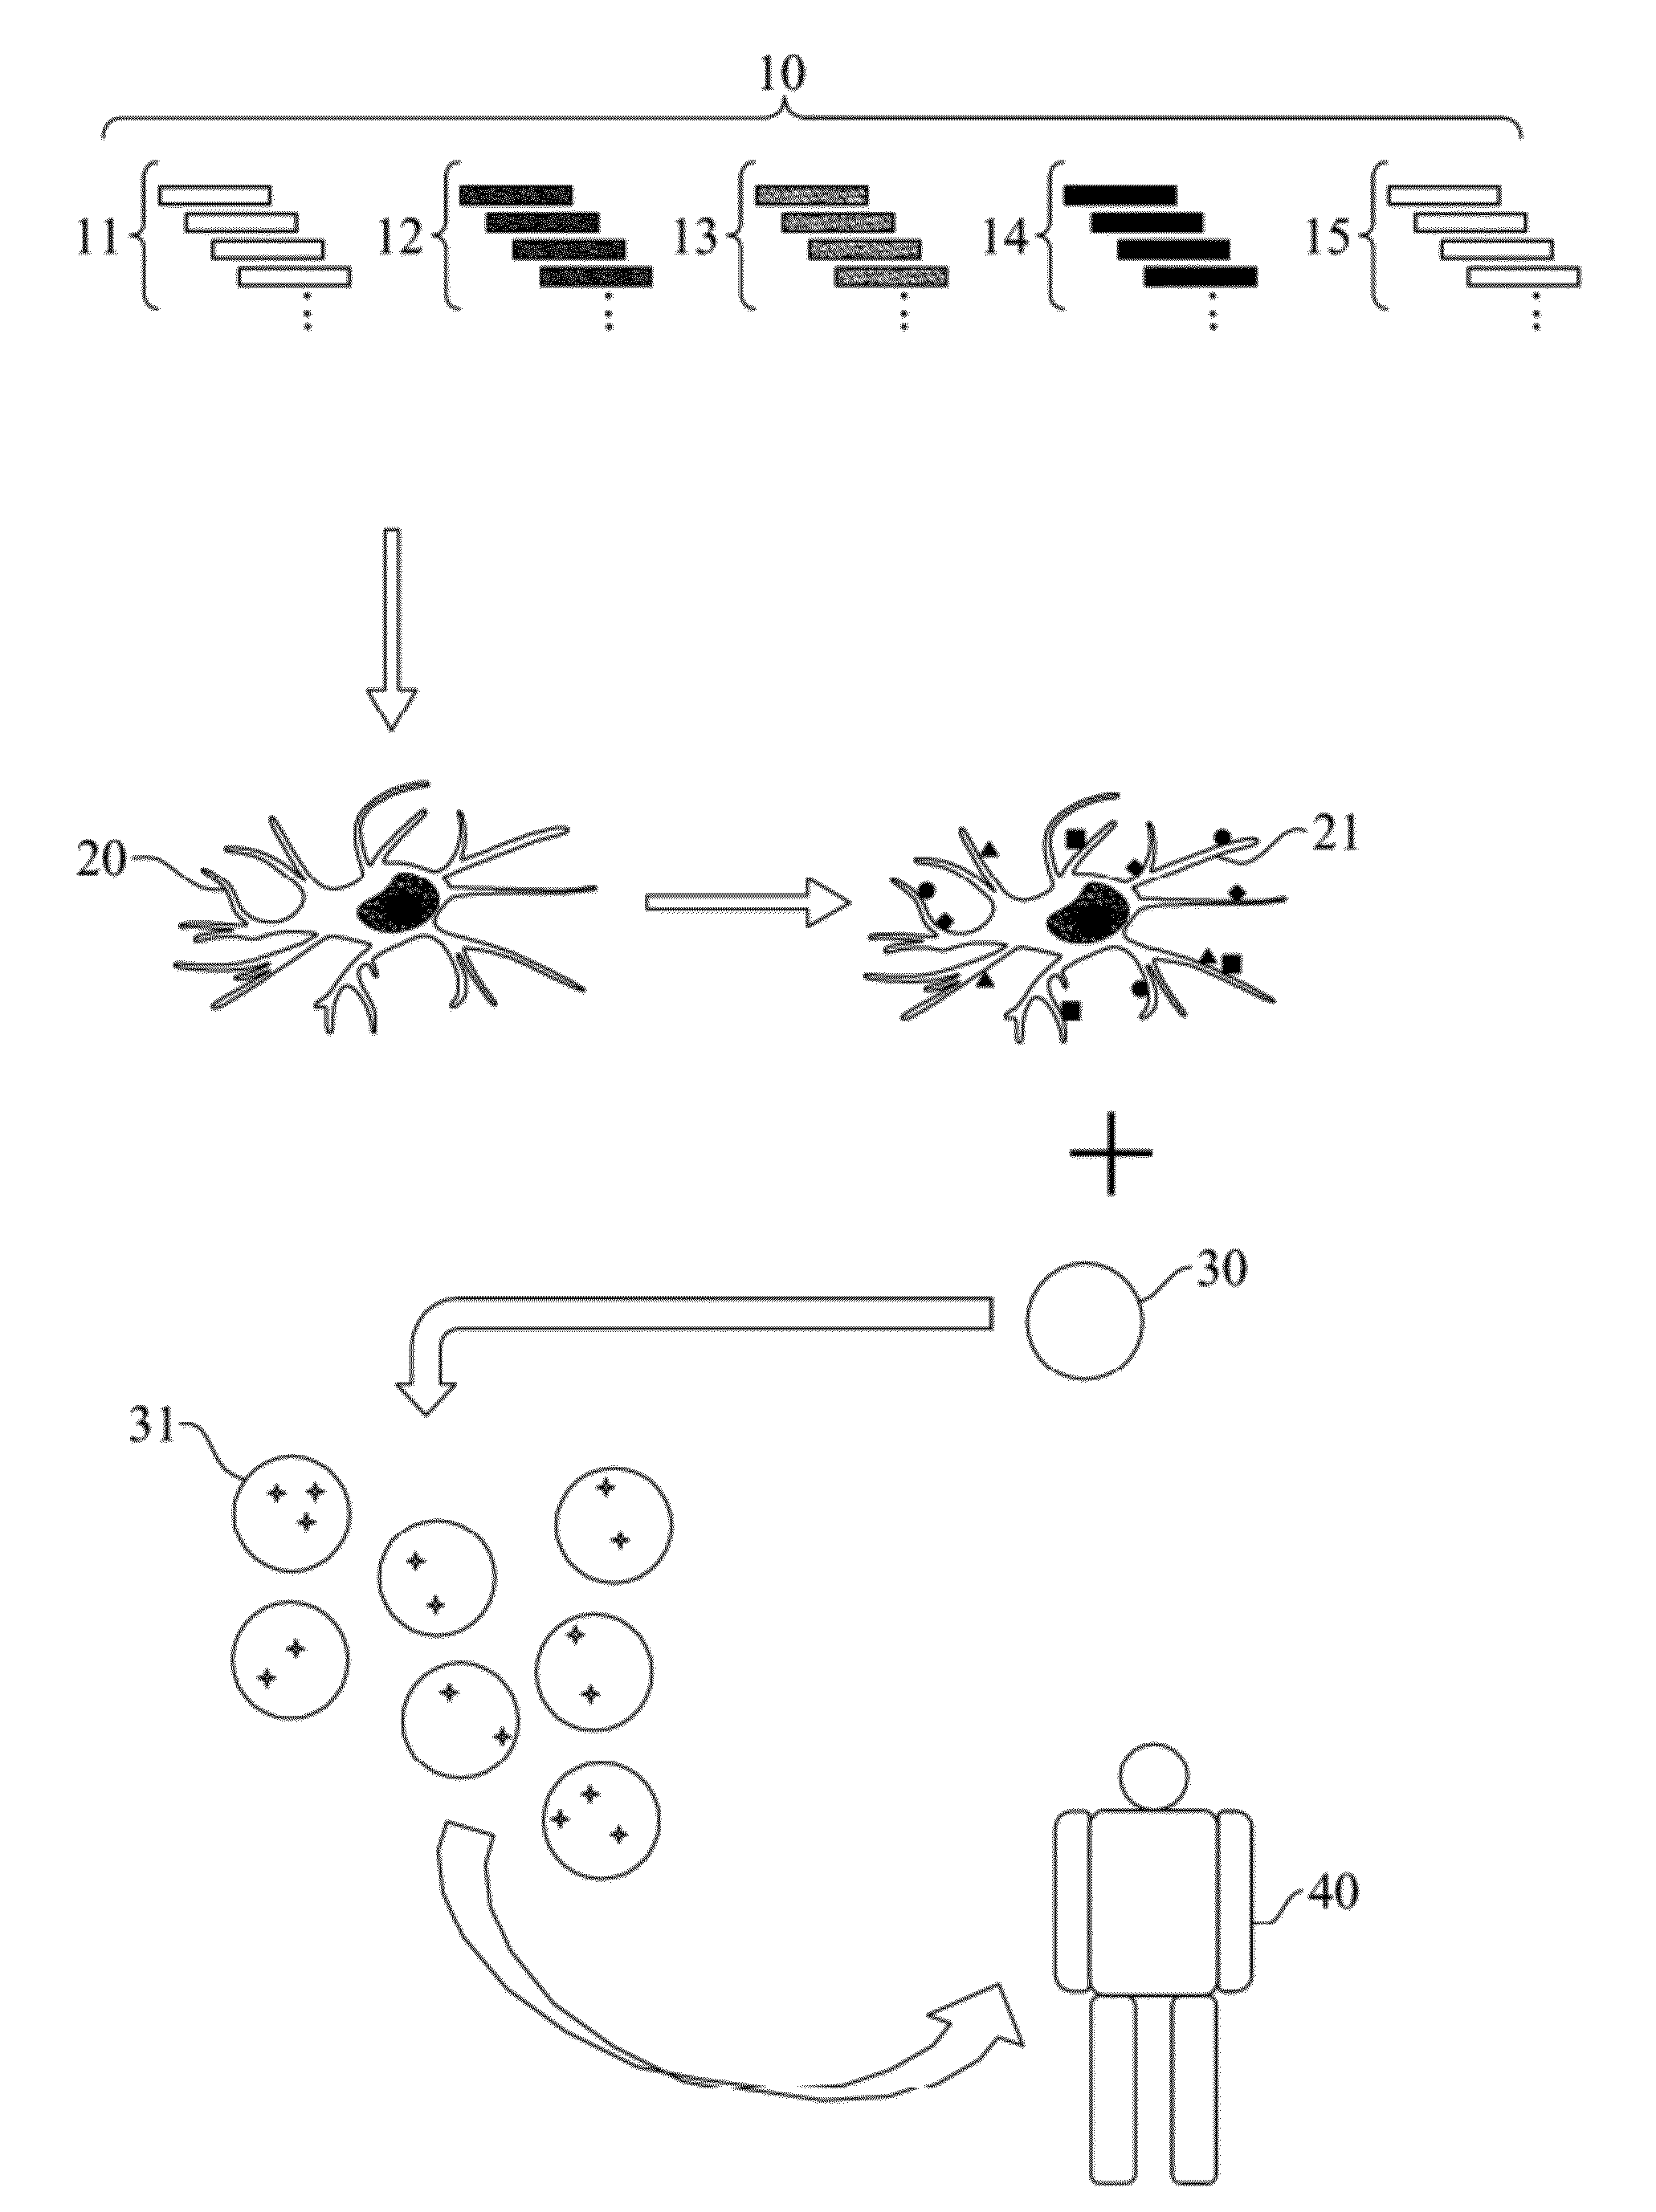 Immunogenic composition comprising peptides derived from cytomegalovirus and the use thereof